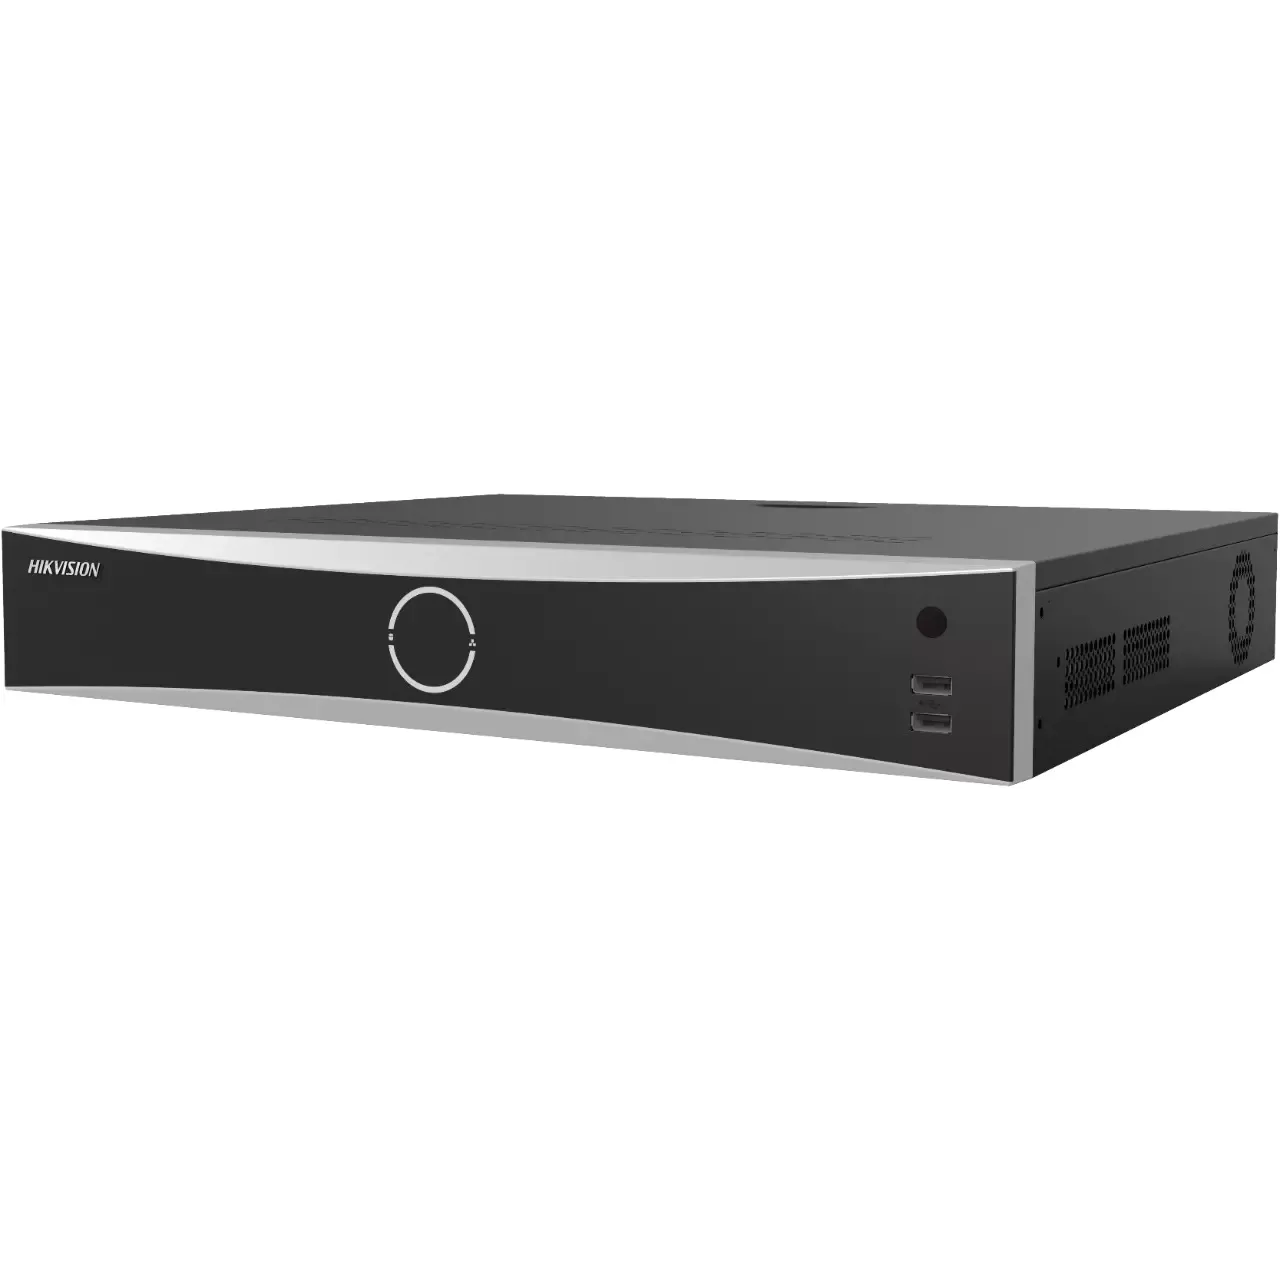 Nvr hikvision ds-7732nxi-i4/16p/s(c) 32 canale